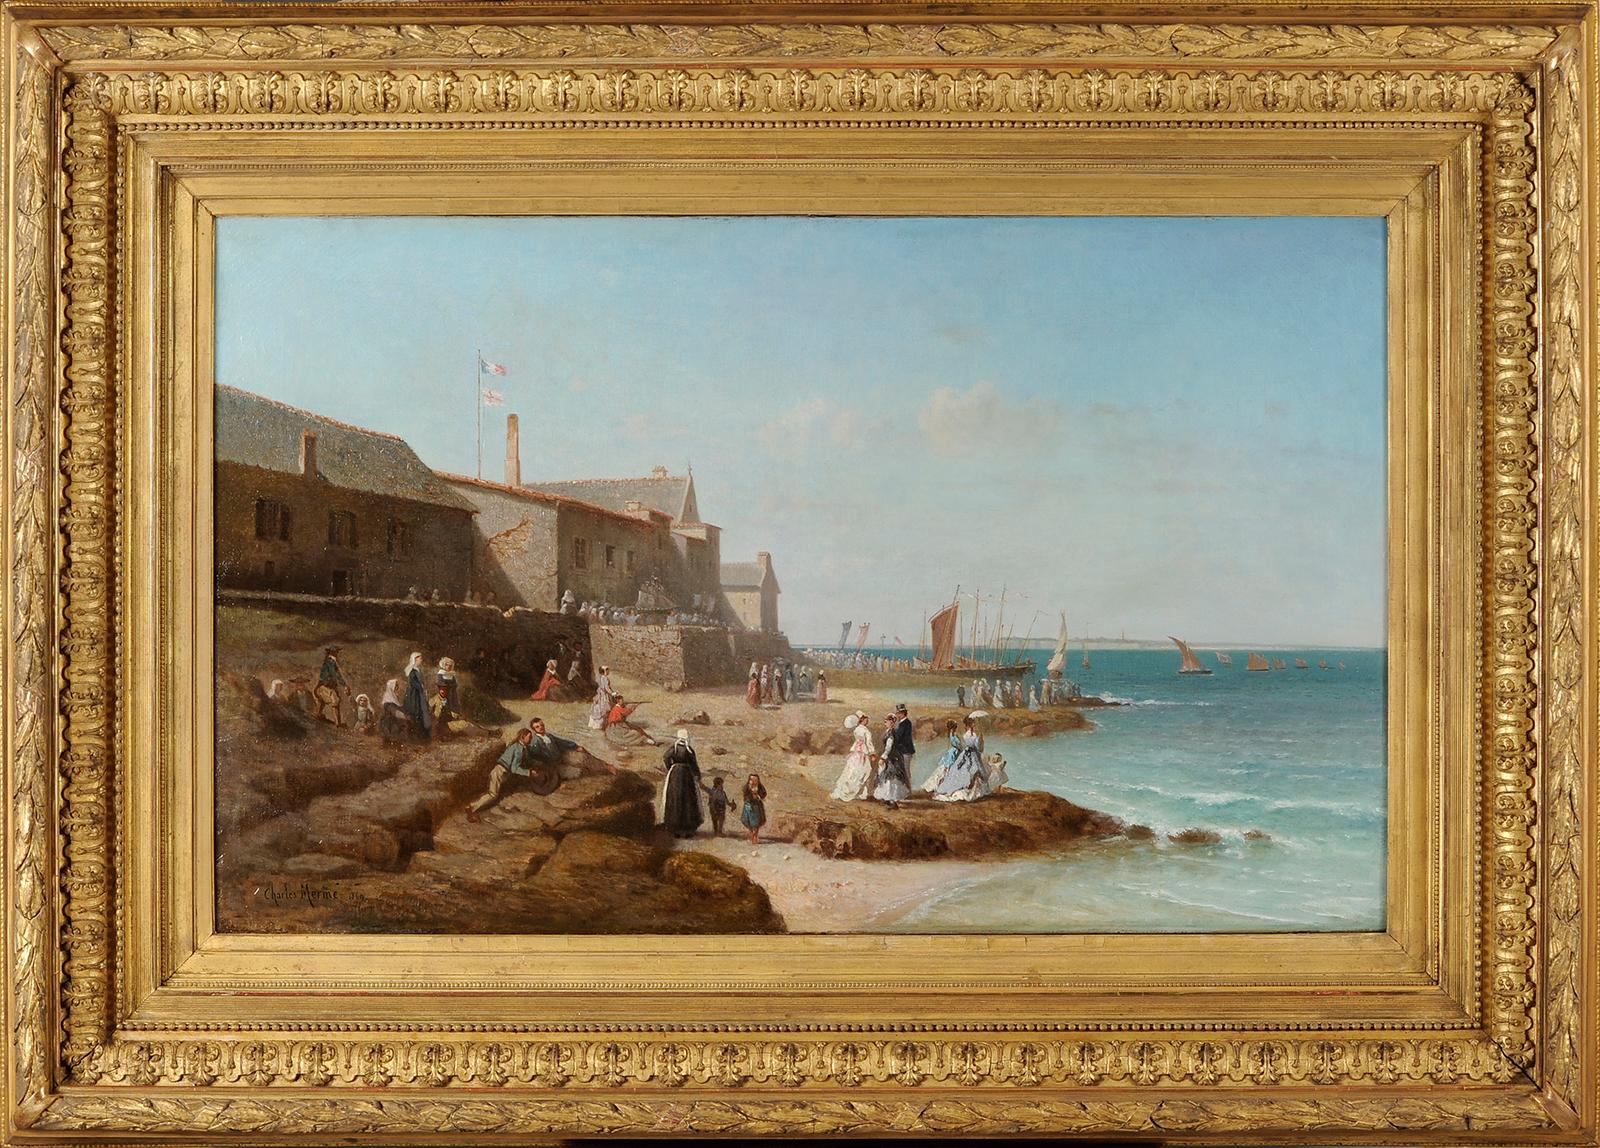 Landscape Painting Charles Mermé - Charles Merme (1818-1869) The blessing of Coureau de Groix in Larmor Brittany